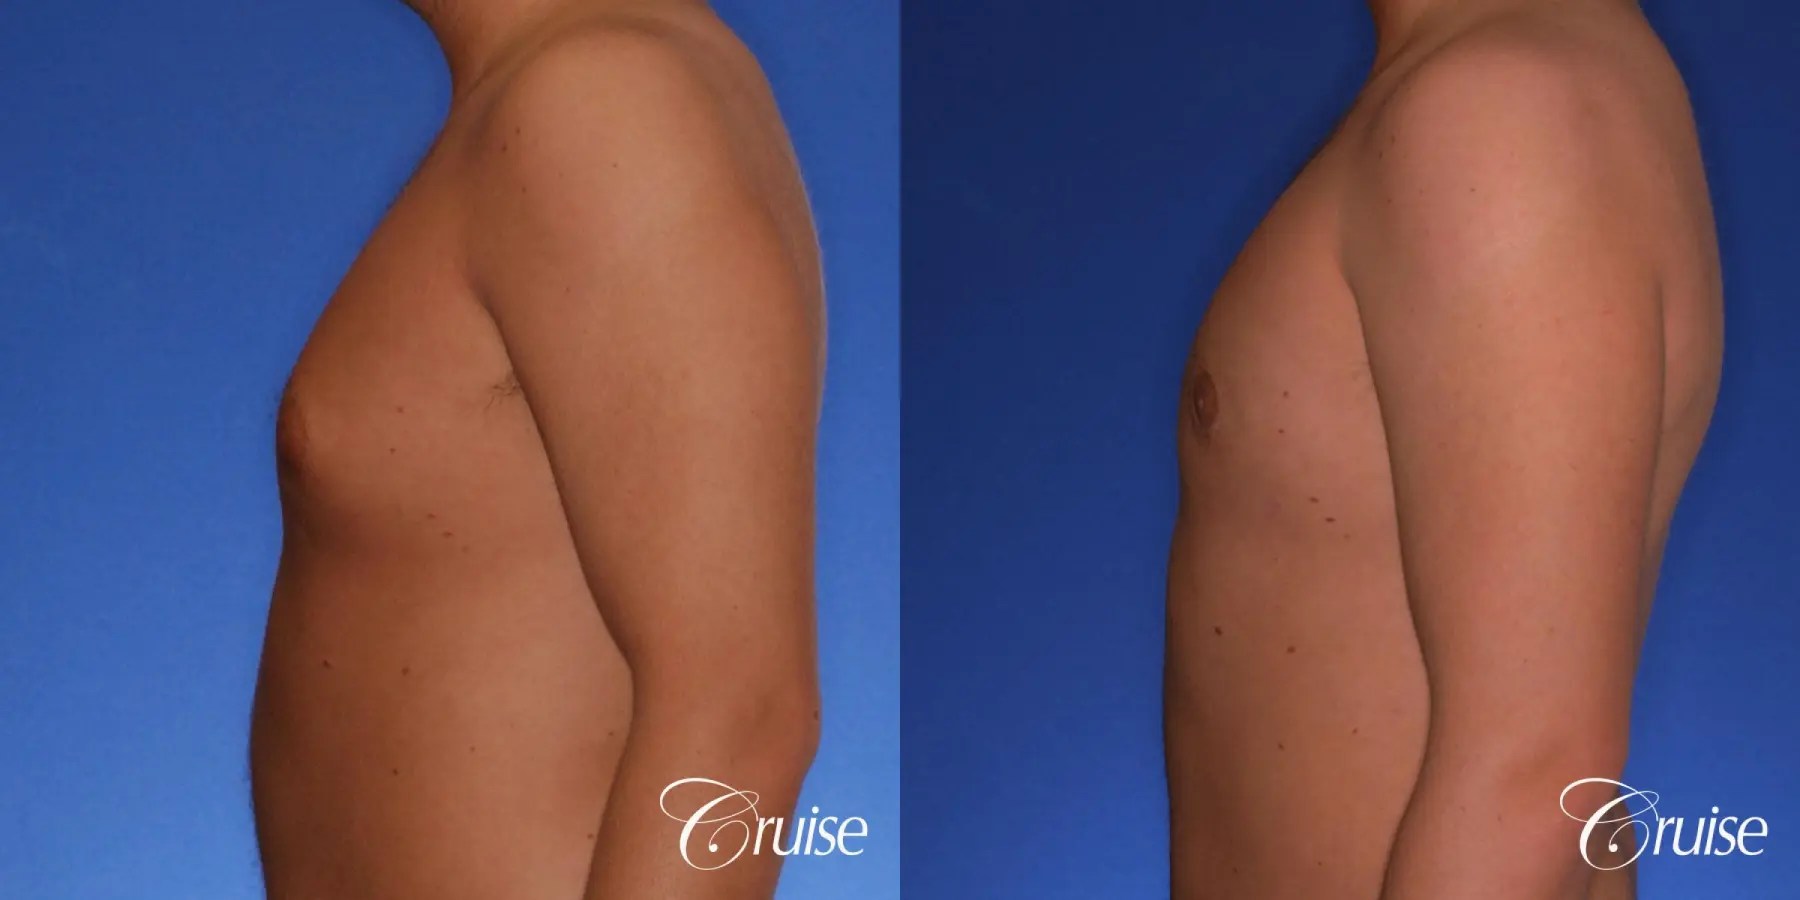 best puffy nipple gynecomastia results with plastic surgeon, Joseph Cruise, M.D. - Before and After 2